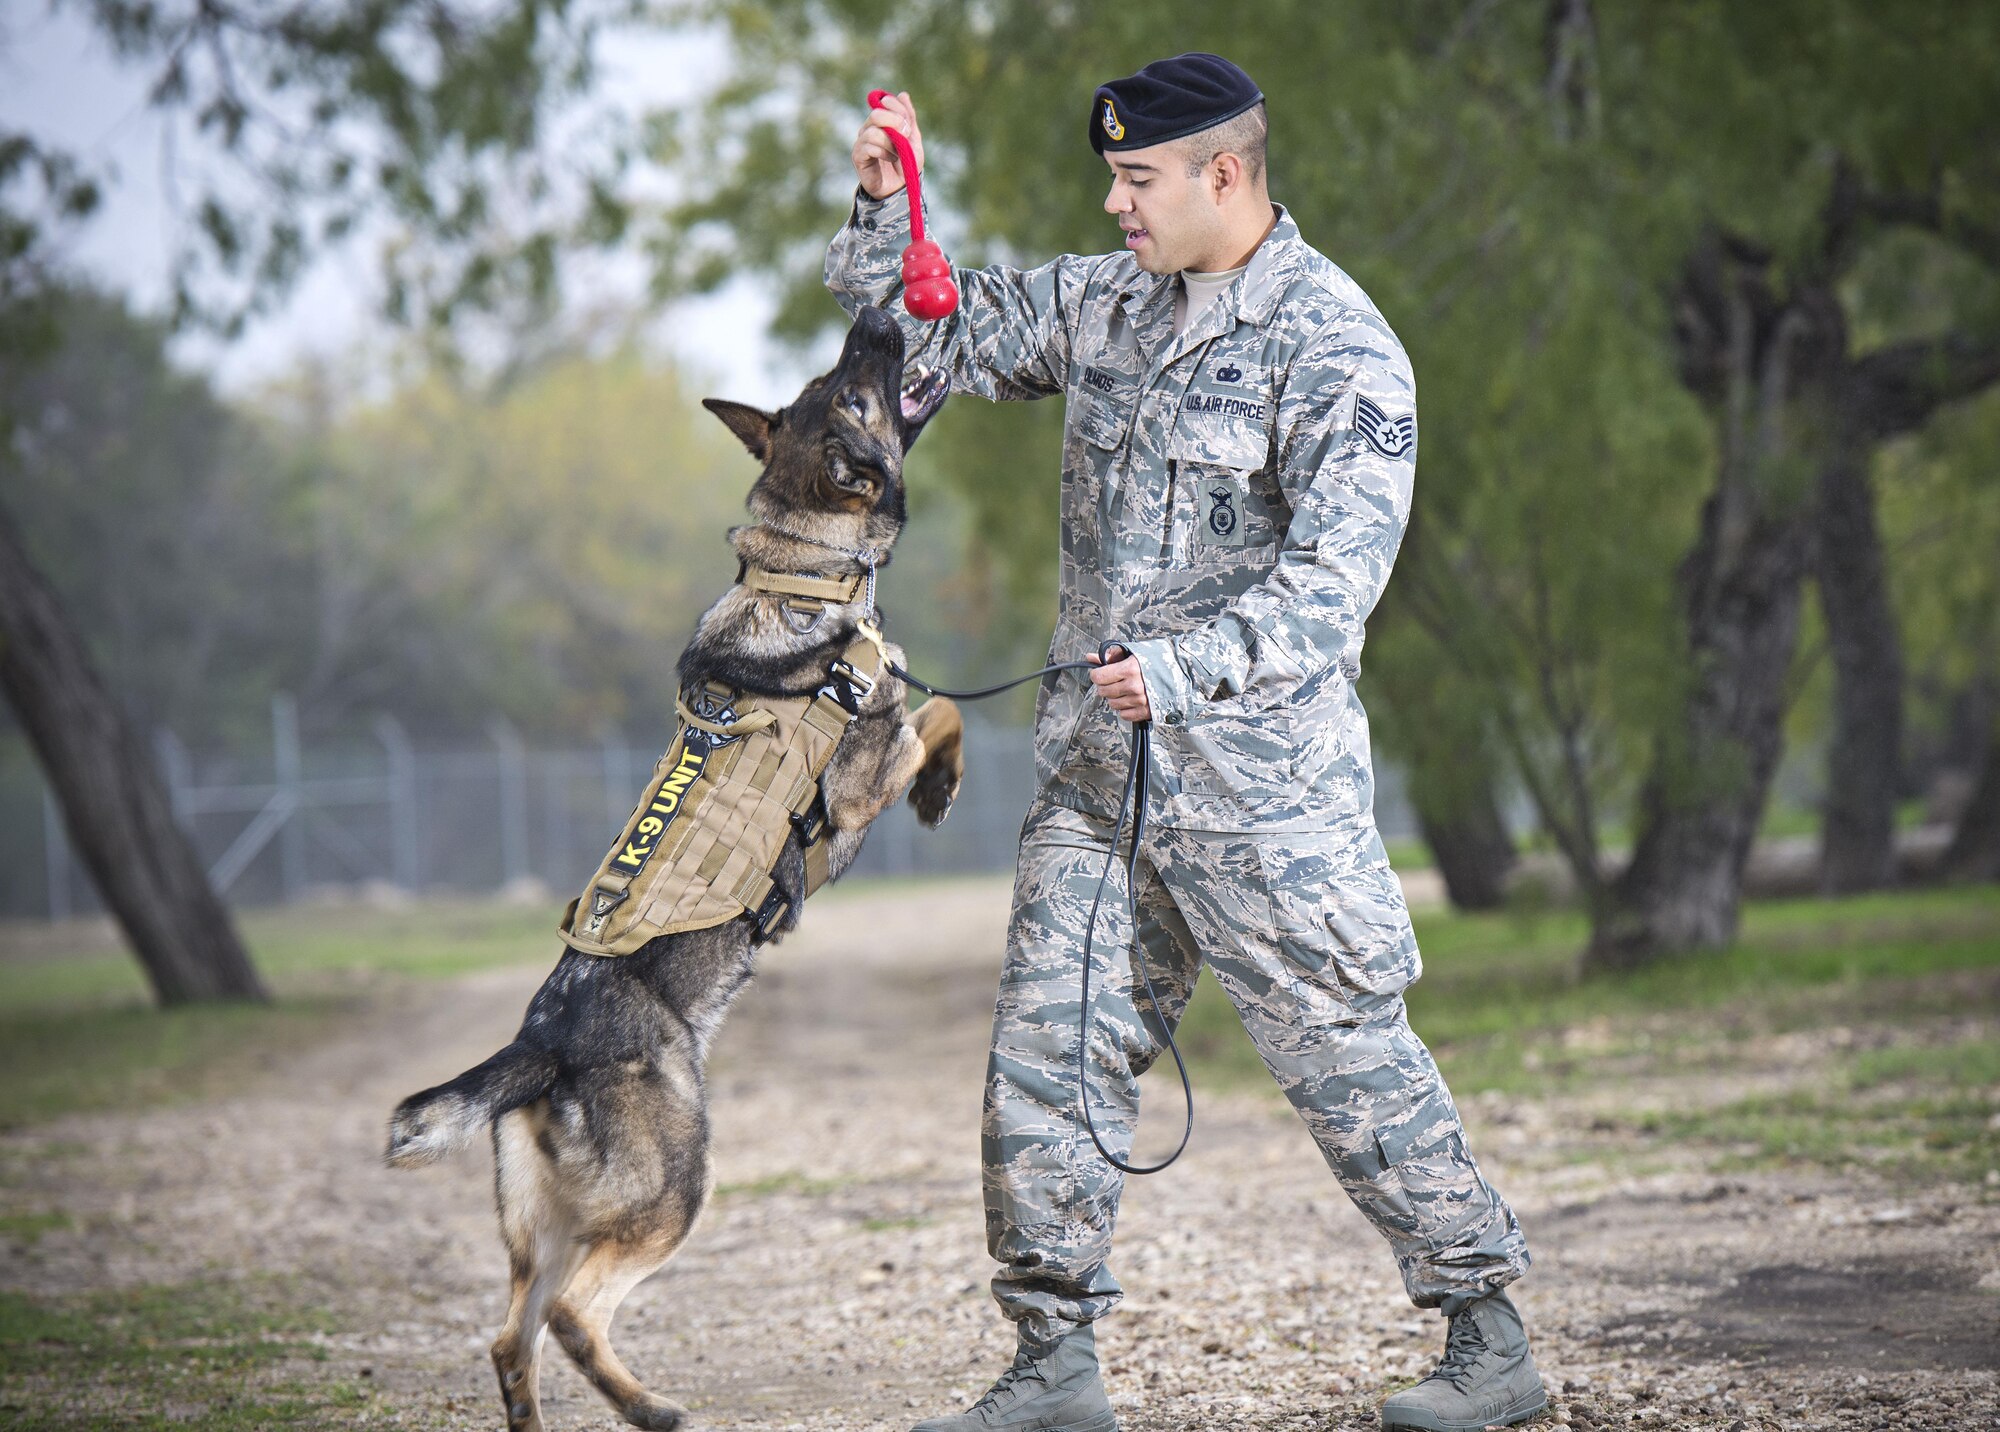 Staff Sgt. Paul Olmos, military working dog handler assigned to the 802nd Security Forces Squadron at Joint Base San Antonio-Lackland, Texas, had been partnered with MWD Daysi since September 2014. MWD Daysi was narcotic detection certified and was assigned to the 802nd SFS post her certification in January 2014. Due to an aggressive cancer and an inoperable malignant tumor, MWD Daysi was laid to rest Feb. 27, 2015. (U.S. Air Force photo by Benjamin Faske)